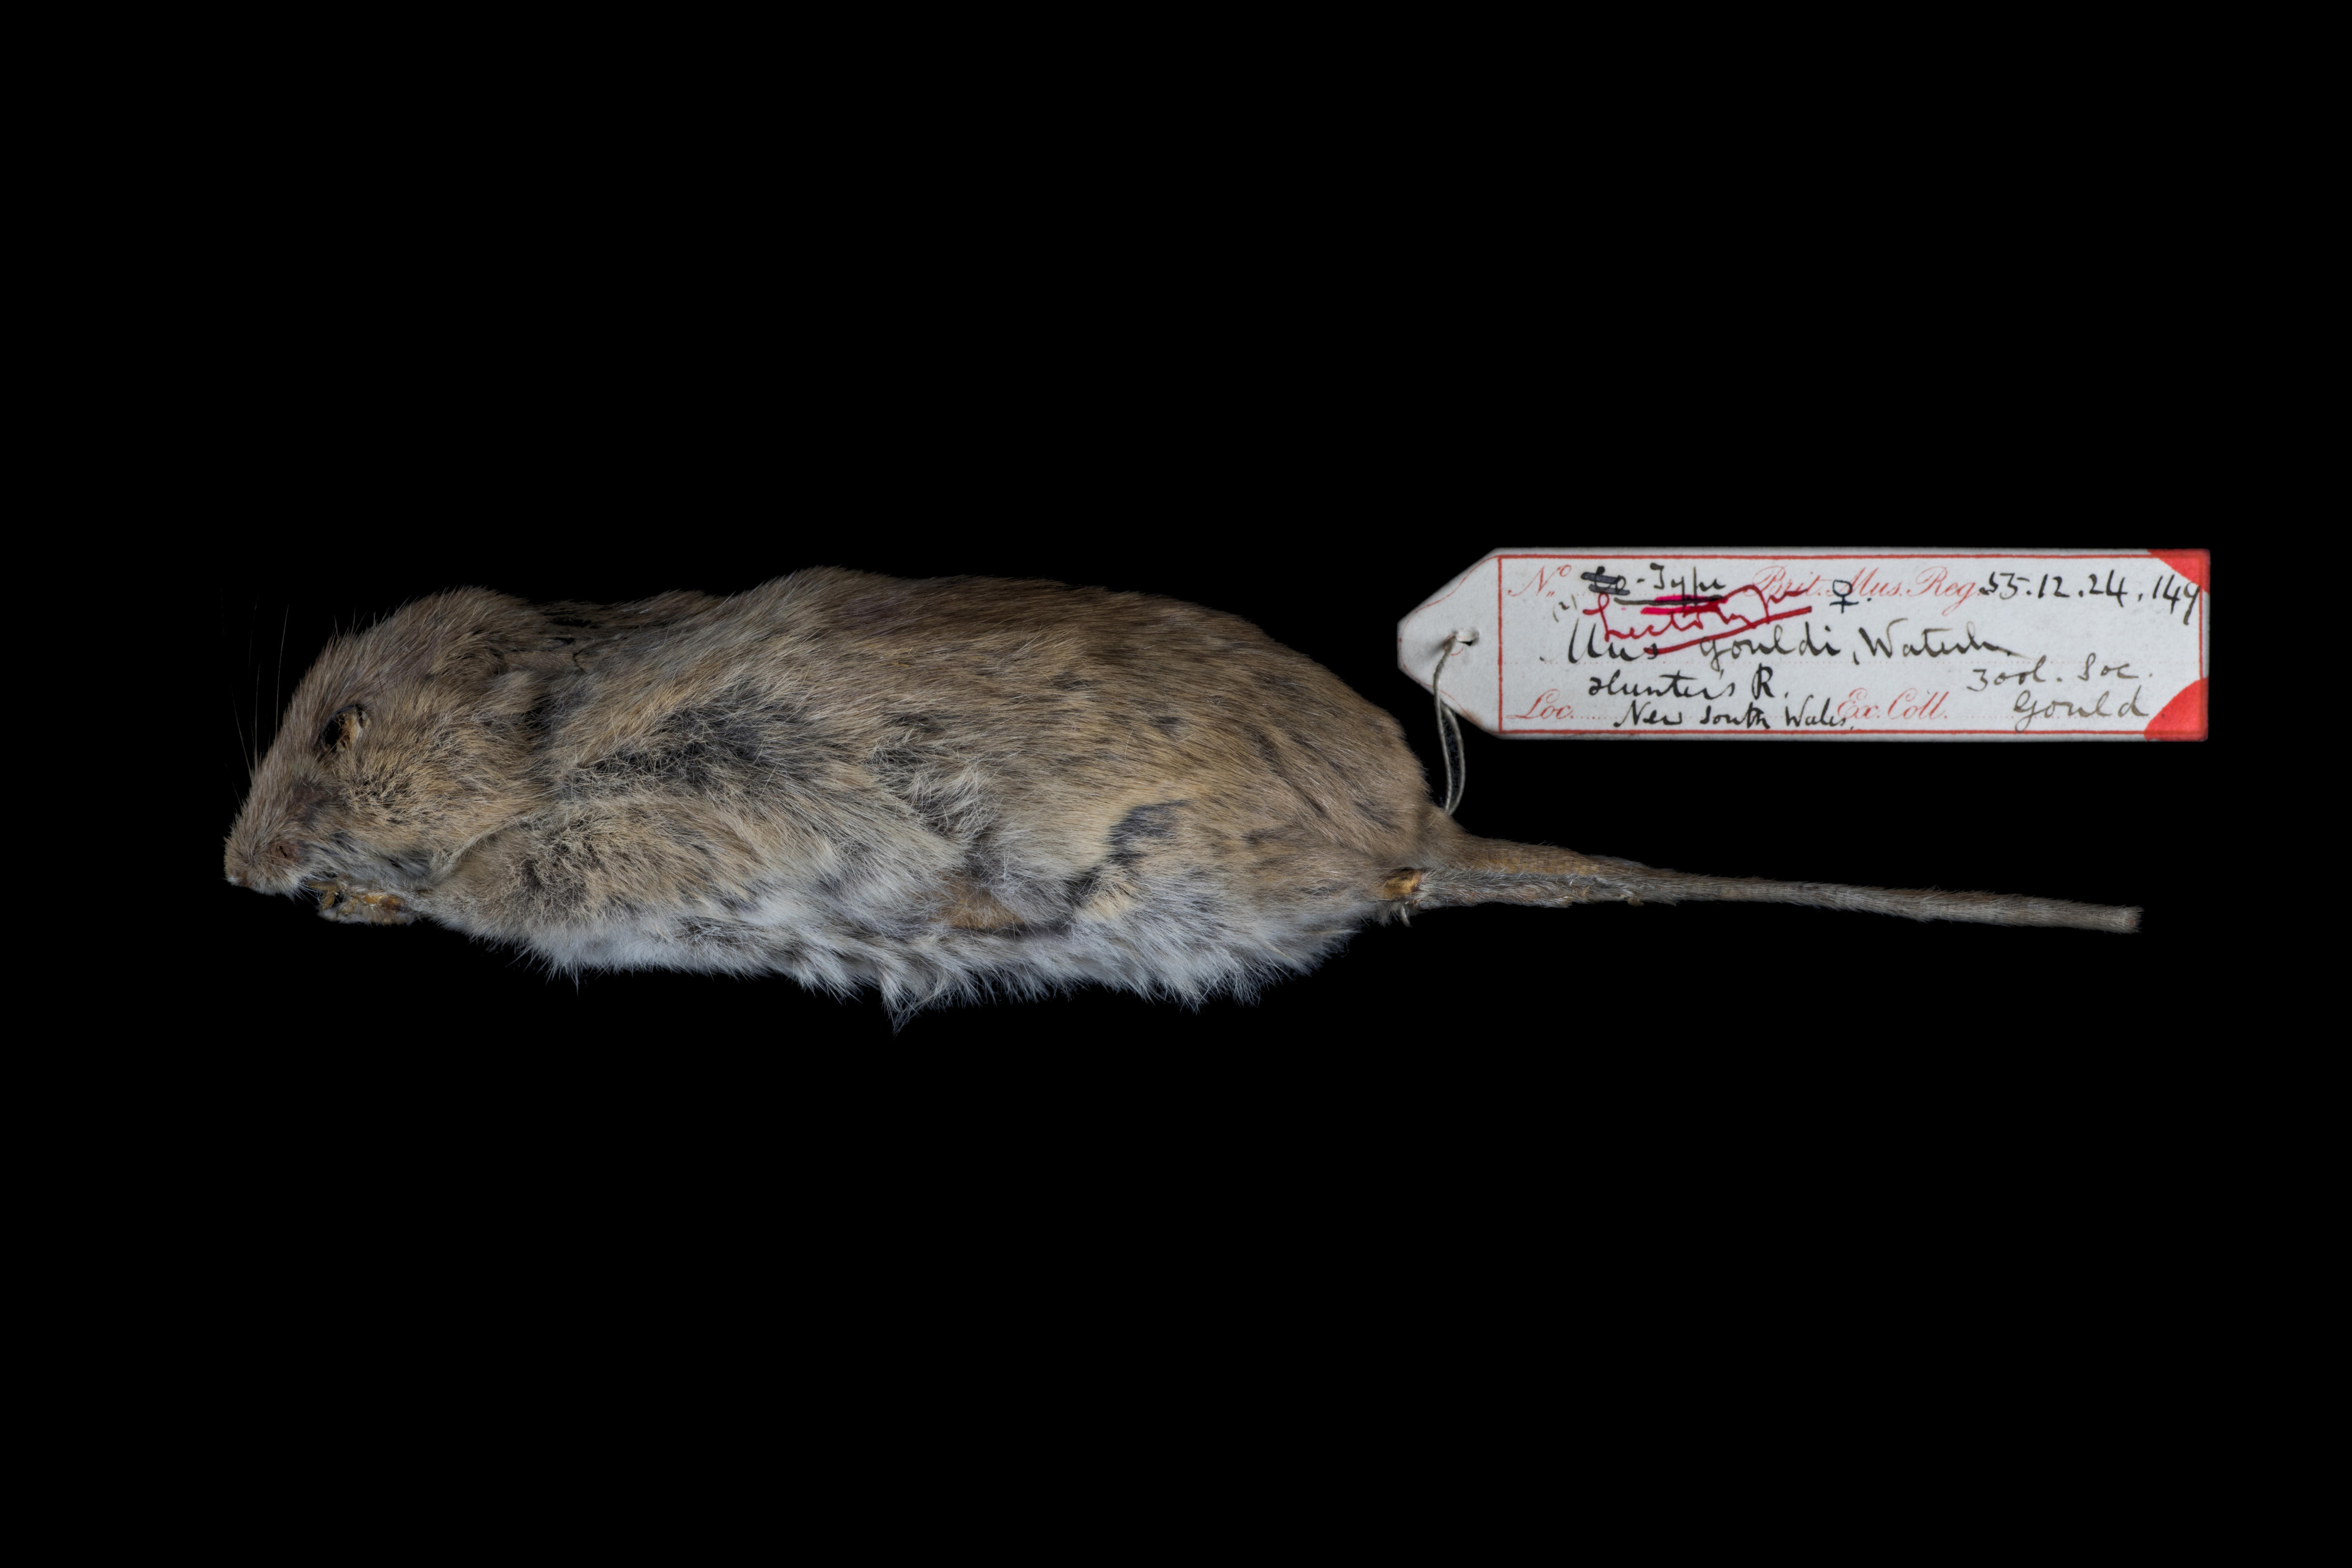 A dead mouse with tag